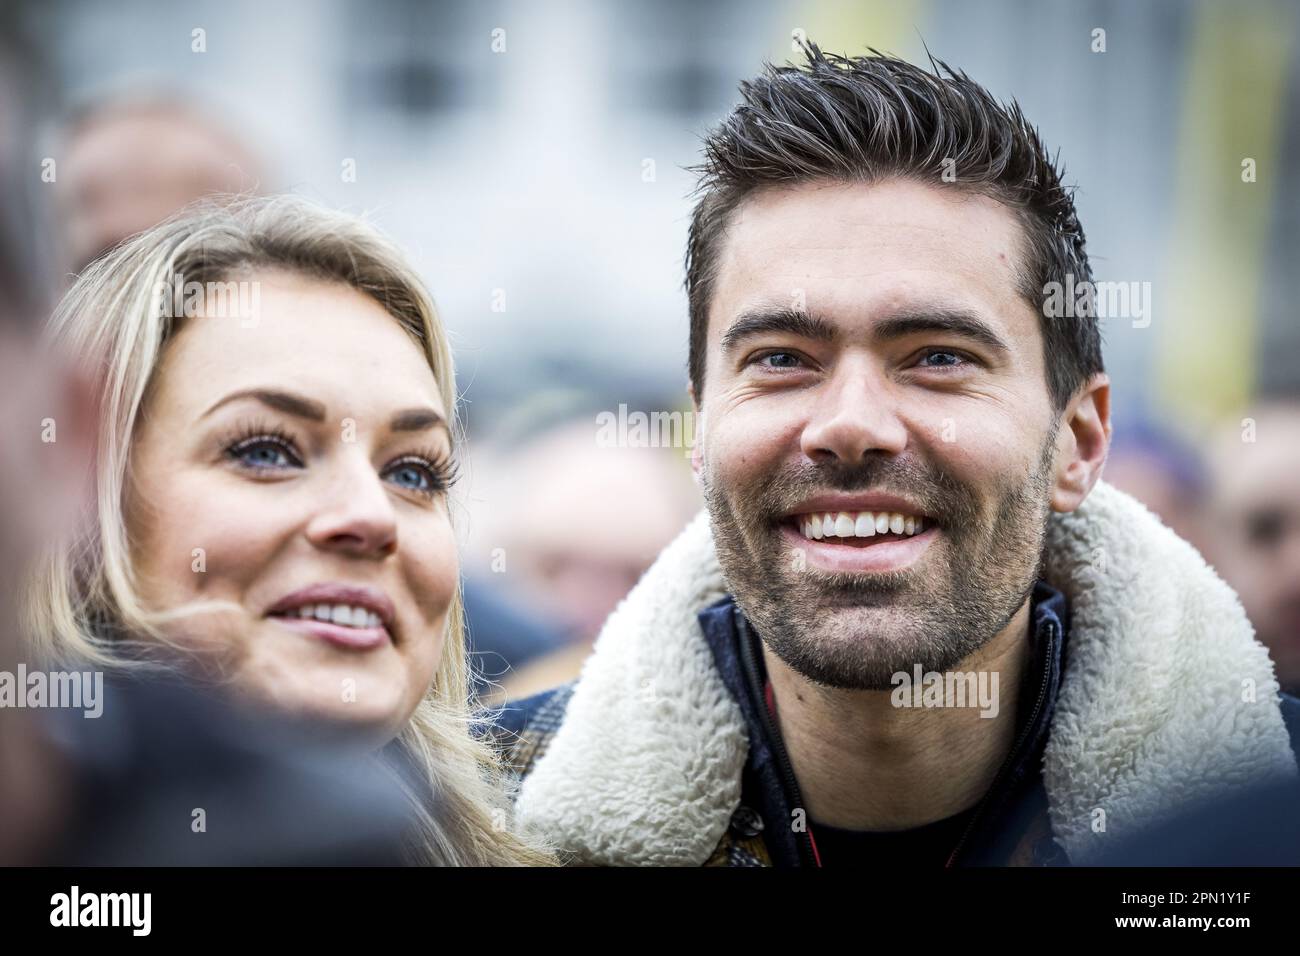 MAASTRICHT - Tom Dumoulin prior to the start of the 57th Amstel Gold Race 2023 on April 16, 2023 in Maastricht, Netherlands. ANP MARCEL VAN HOORN netherlands out - belgium out Stock Photo